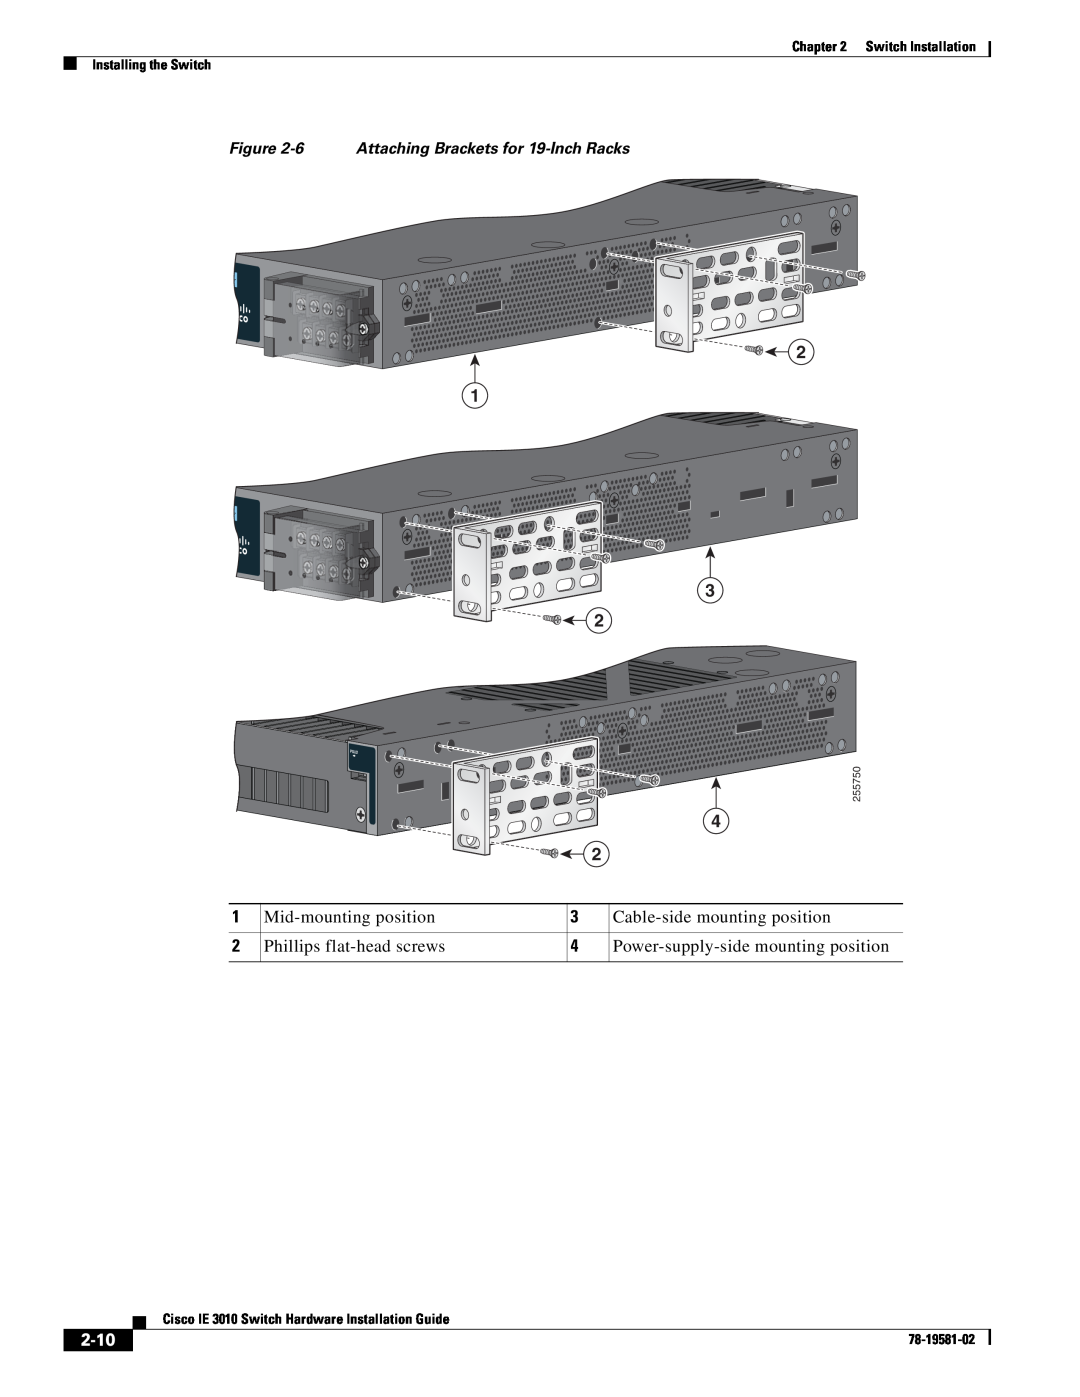 Cisco Systems 3010 2-10, 6 Attaching Brackets for 19-Inch Racks, Switch Installation Installing the Switch, 78-19581-02 